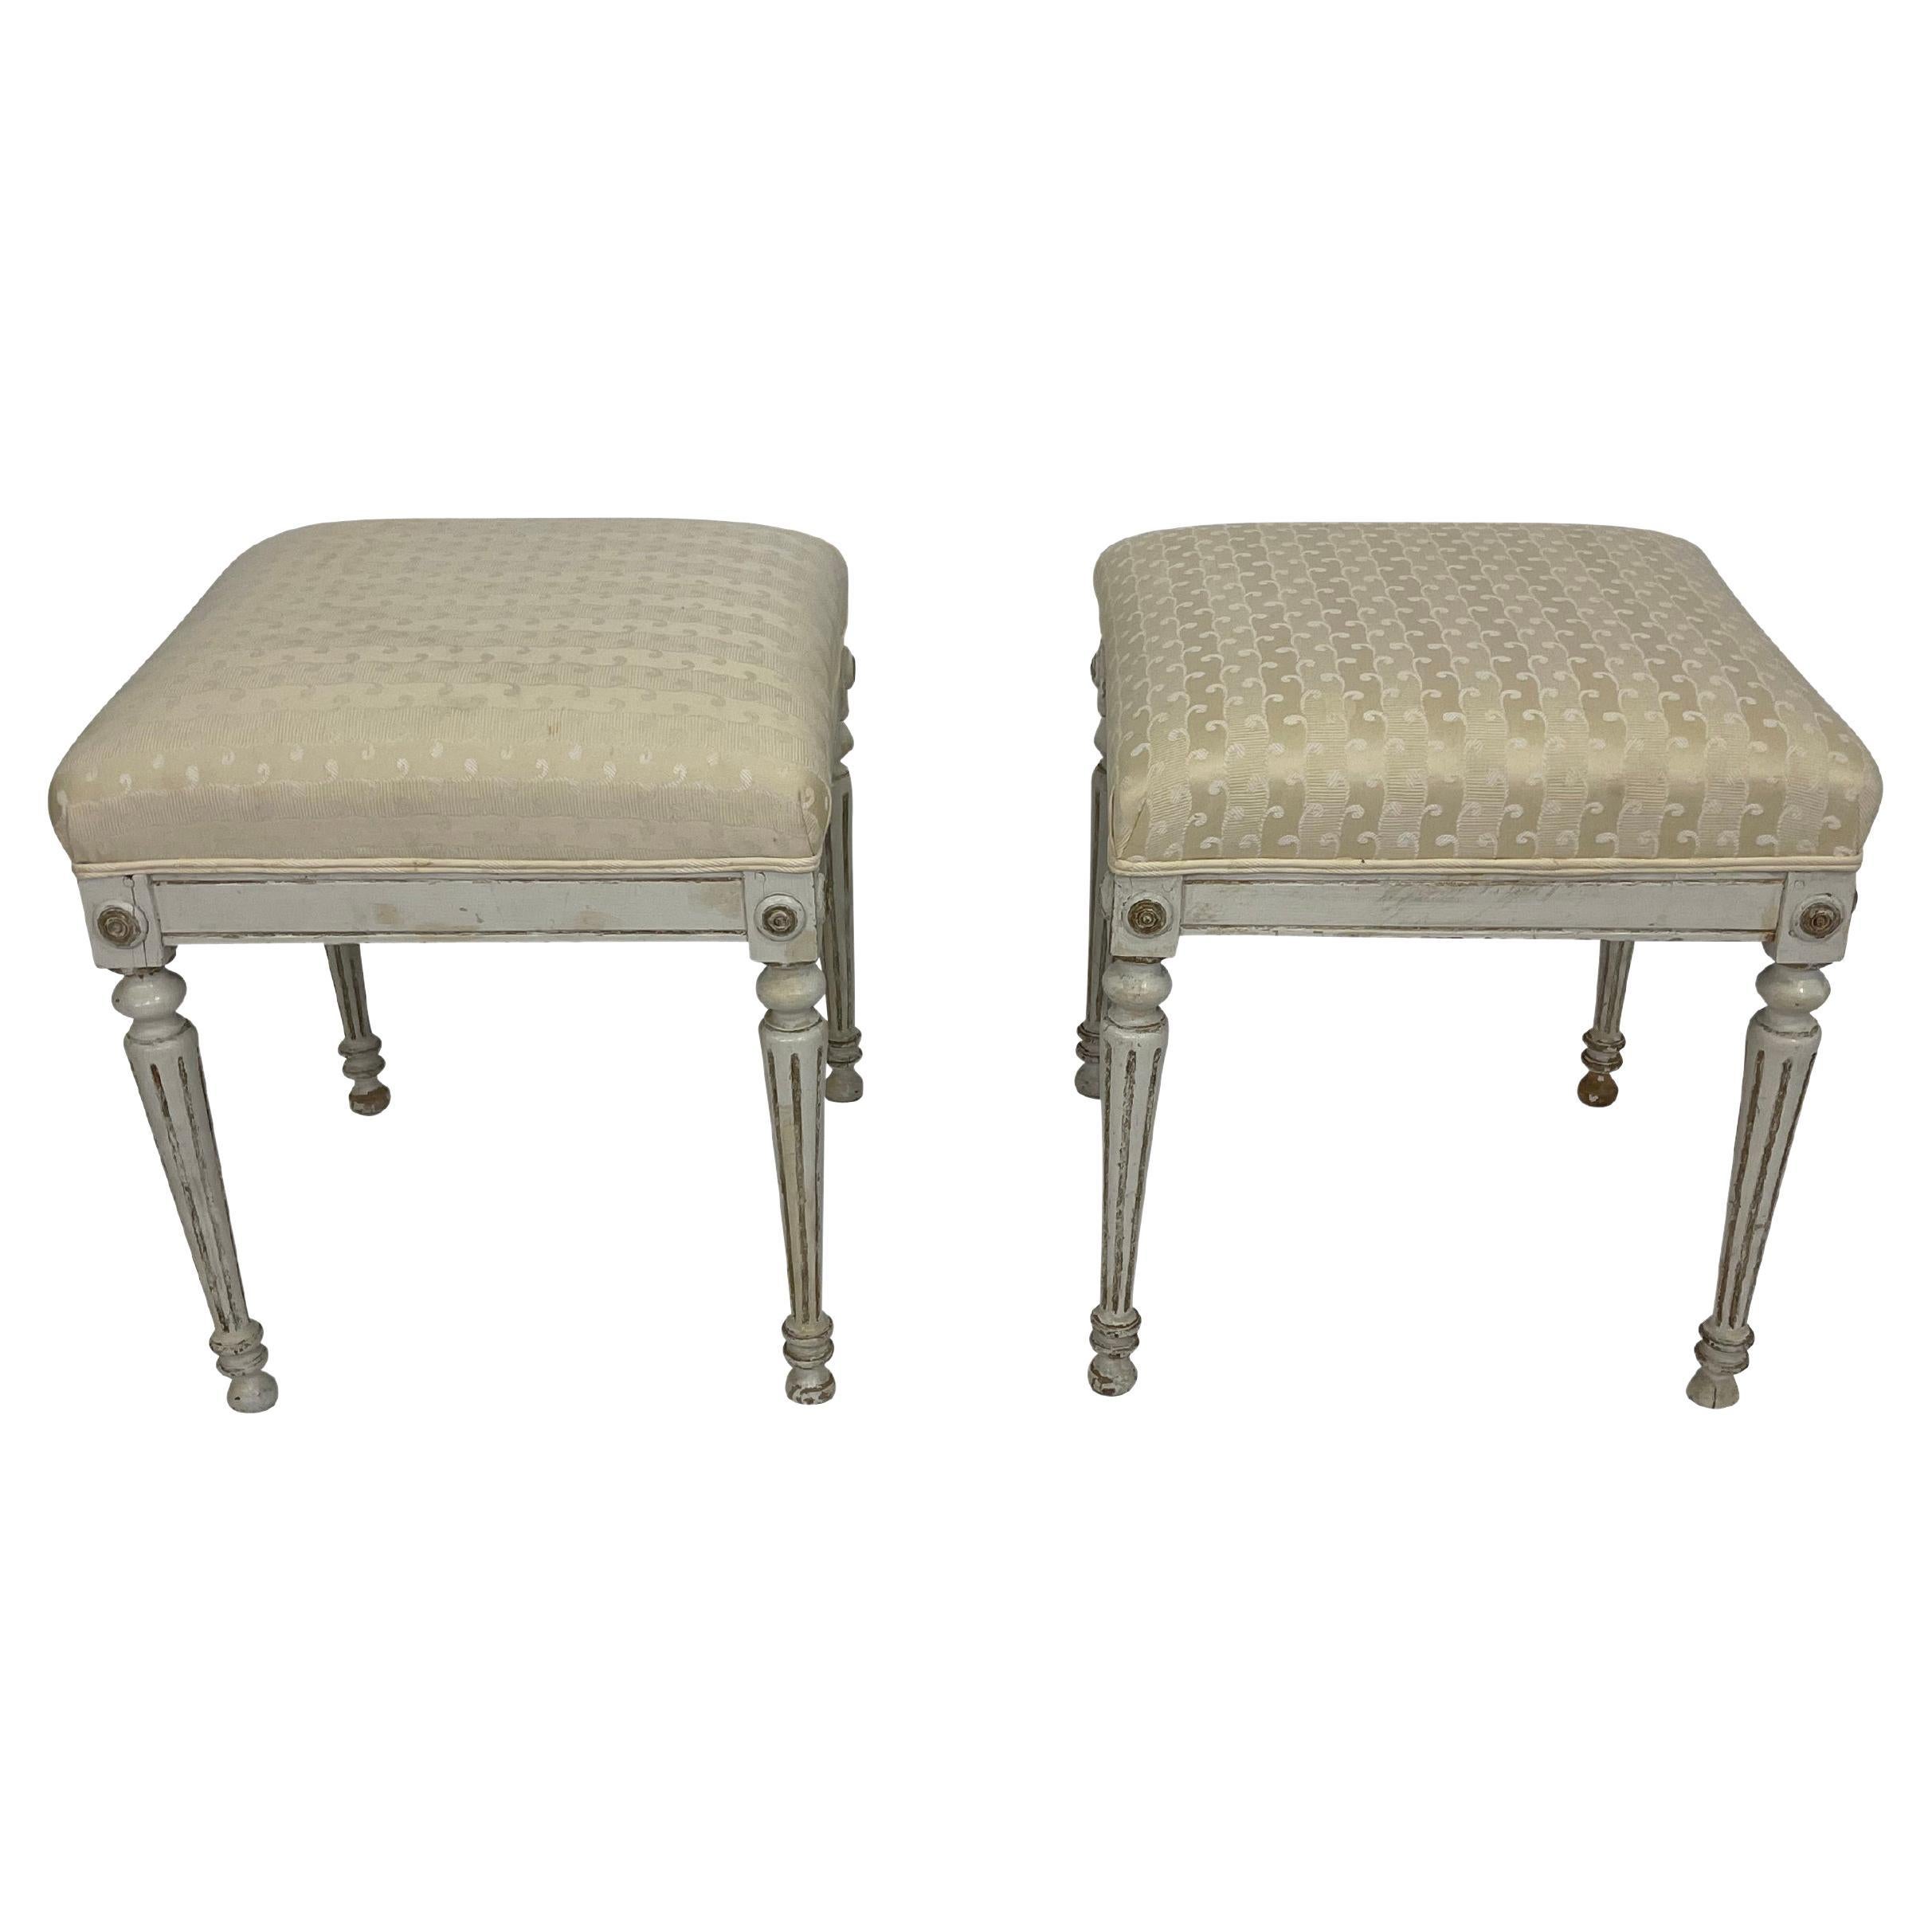 Pair of Swedish Gustavian Ottomans in white paint and parcel gilt. In a white painted finish, the carved frames in the Louis XVI style with cylindrical fluted tapering legs and toupie feet. These stools have been professionally restored to their